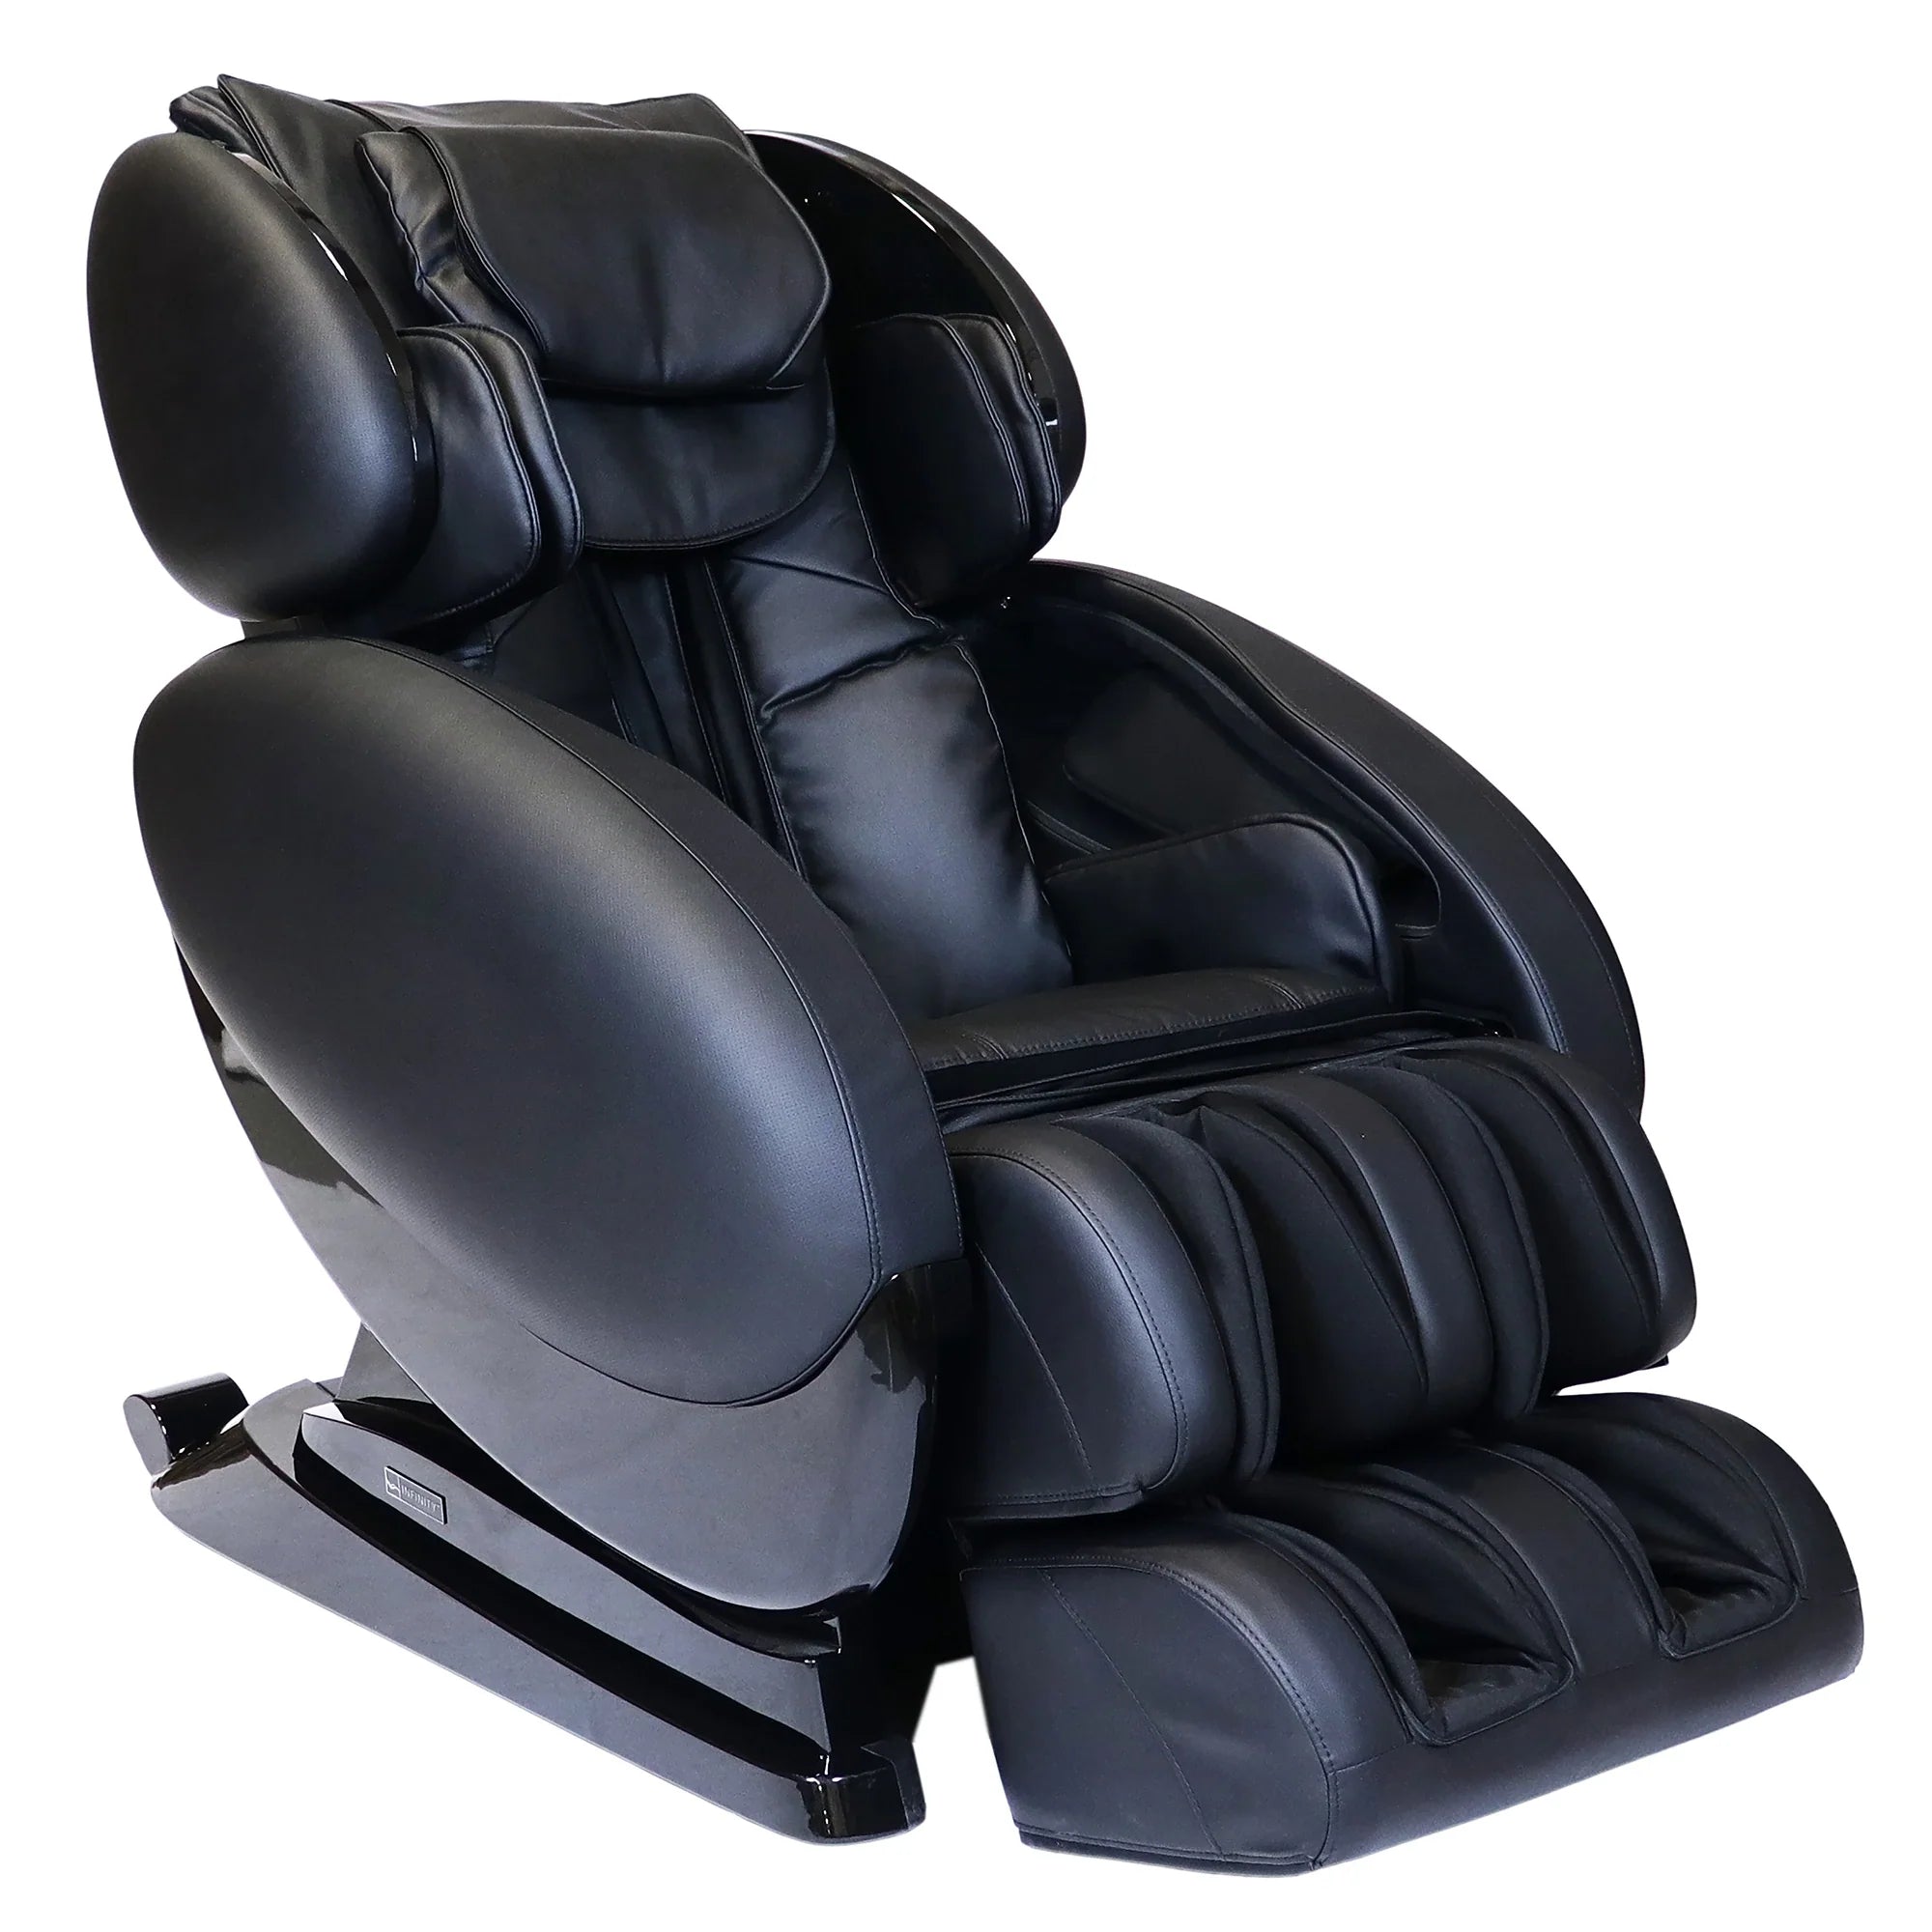 Infinity IT-8500™ X3 3D/4D Massage Chair PRE-OWNED